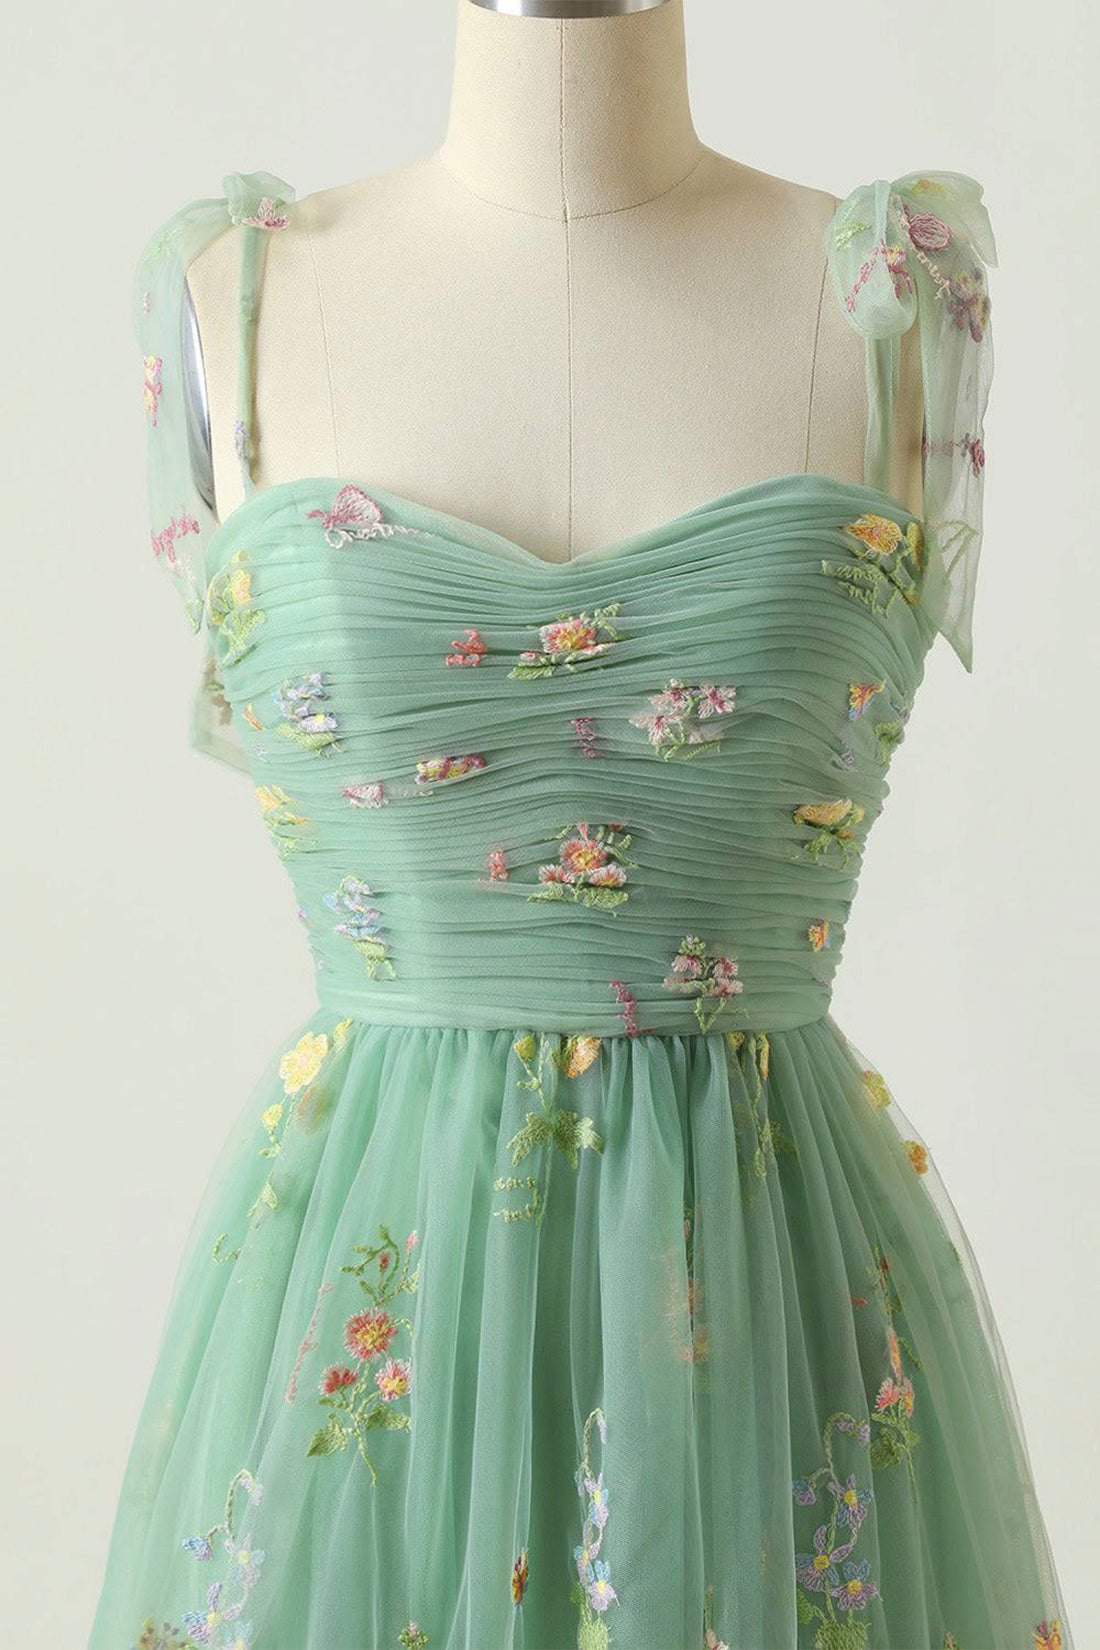 Green Floral Tulle Long Prom Dress, Beautiful Tulle Evening Party Dress